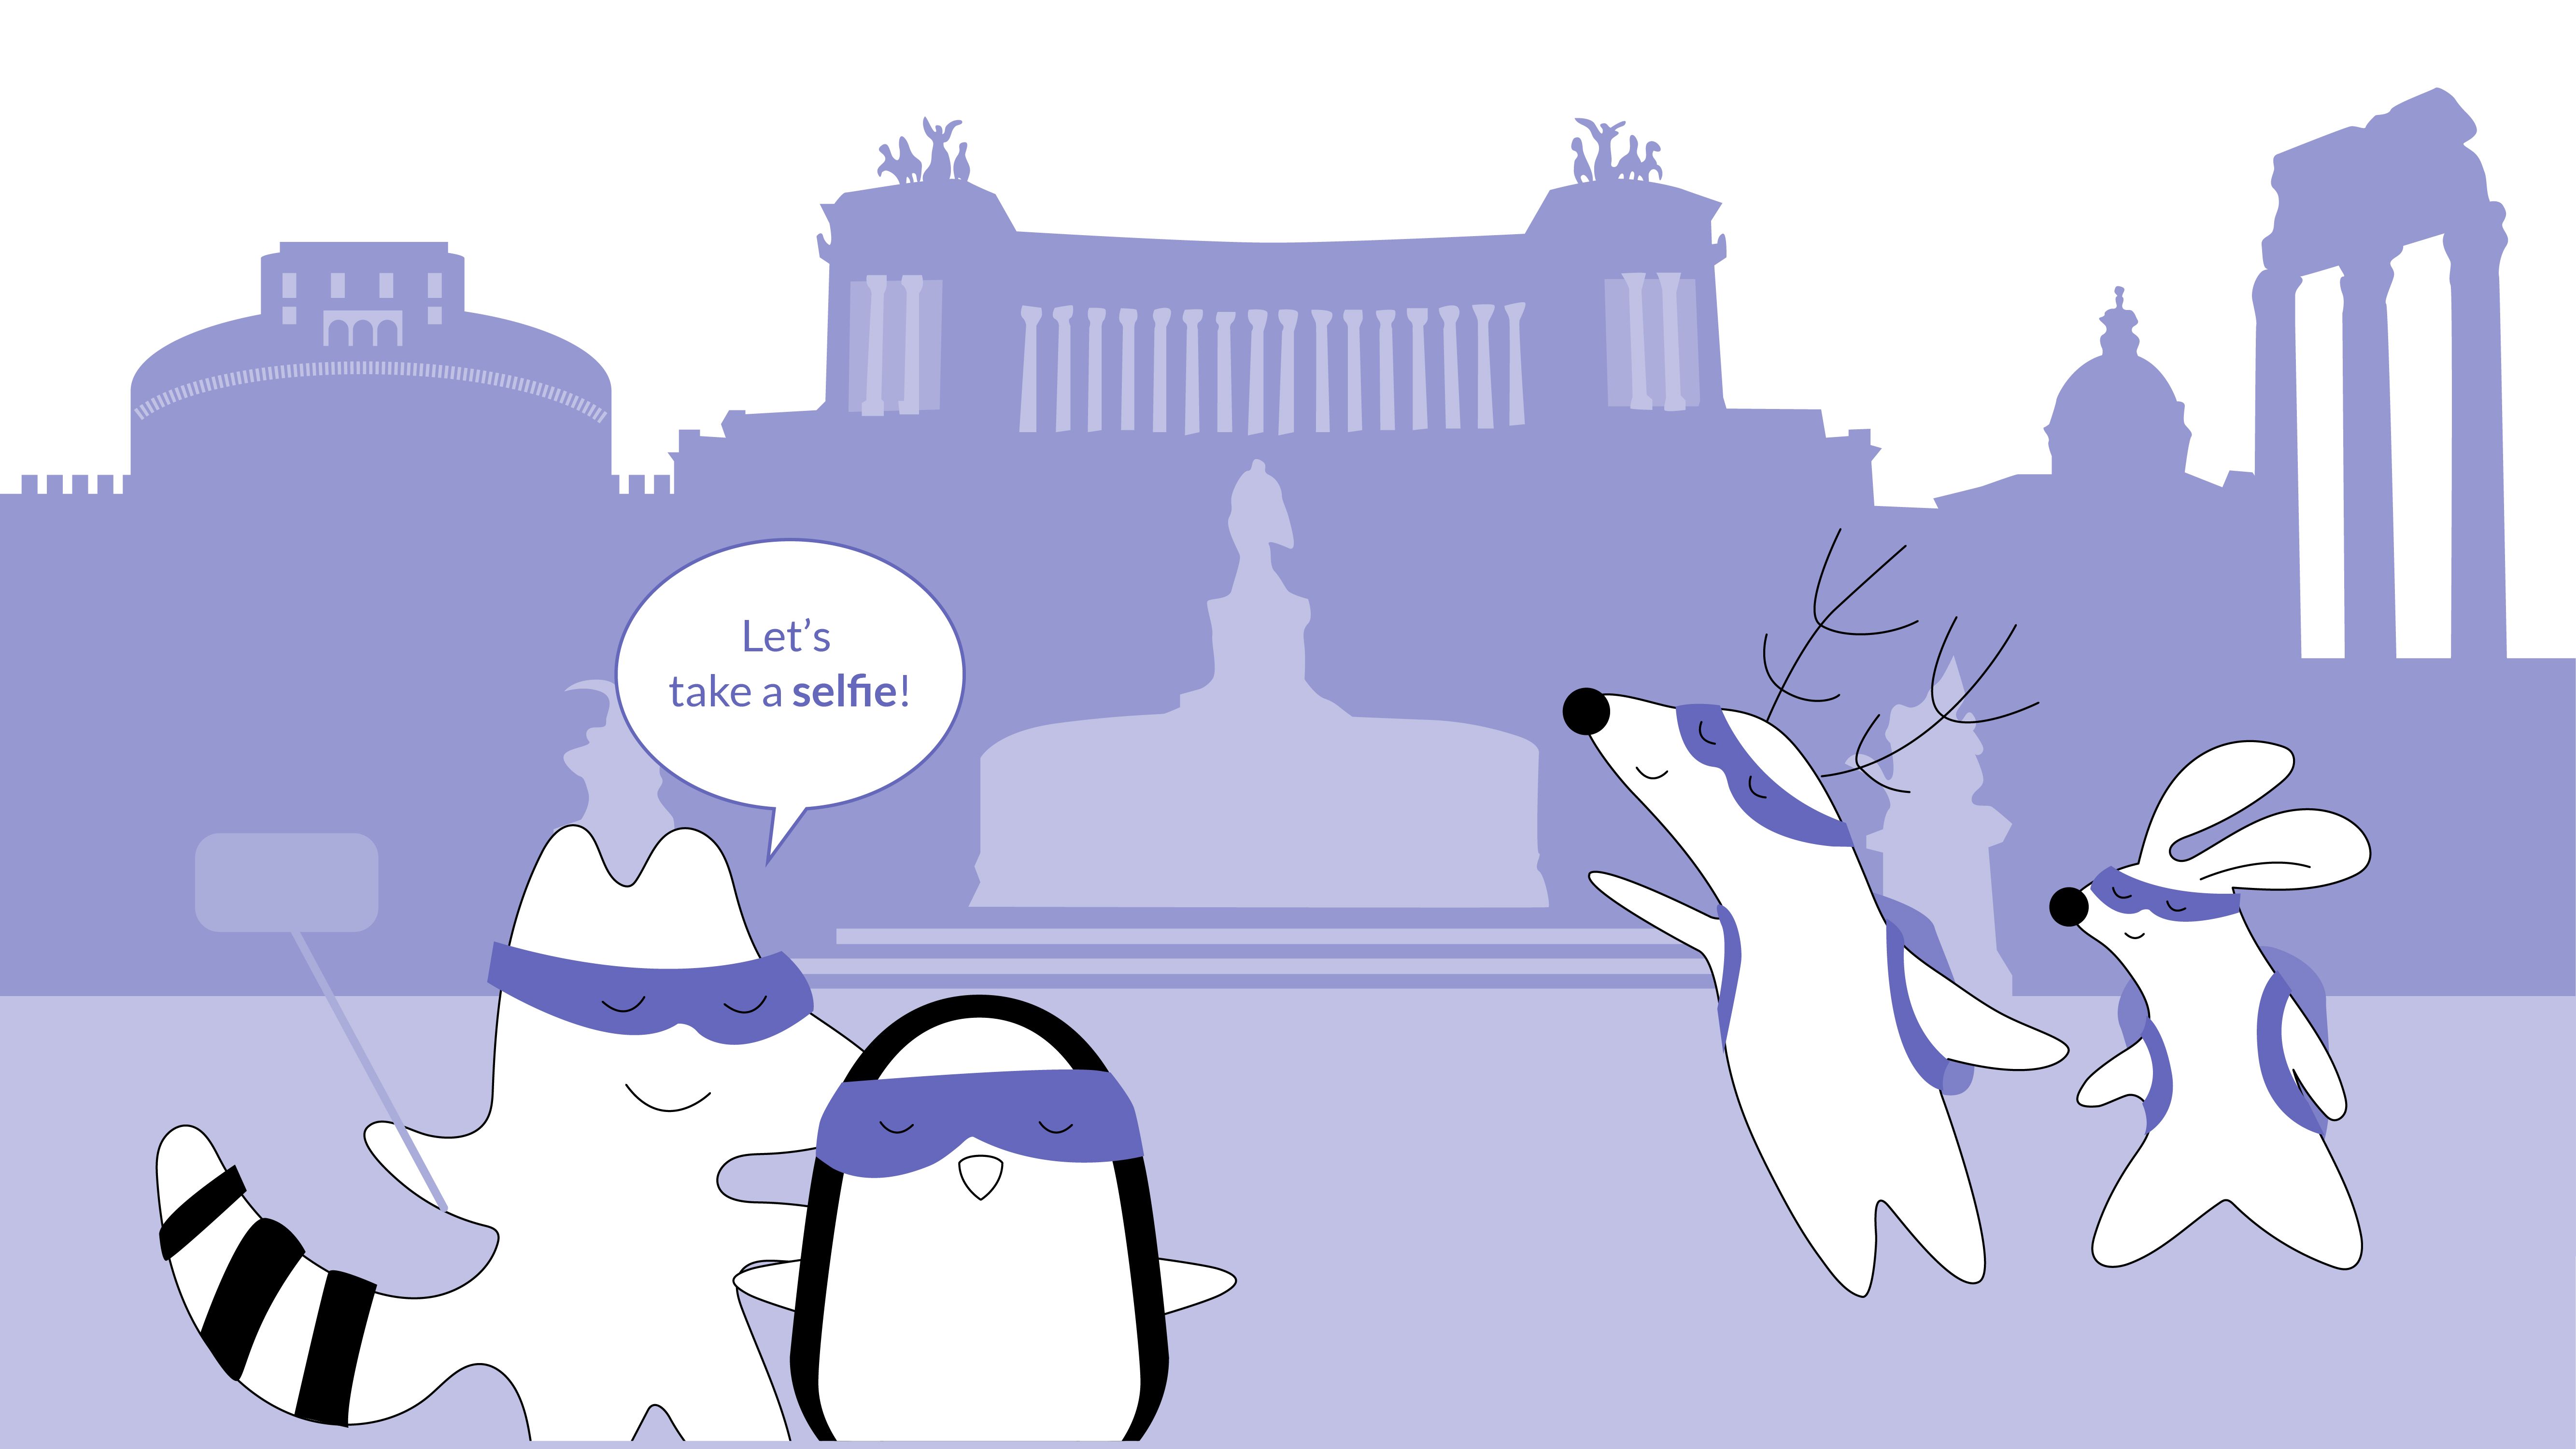 Iggy, Soren, Benji, and Pocky are standing in front of the famous fountain in Rome, taking a picture. 